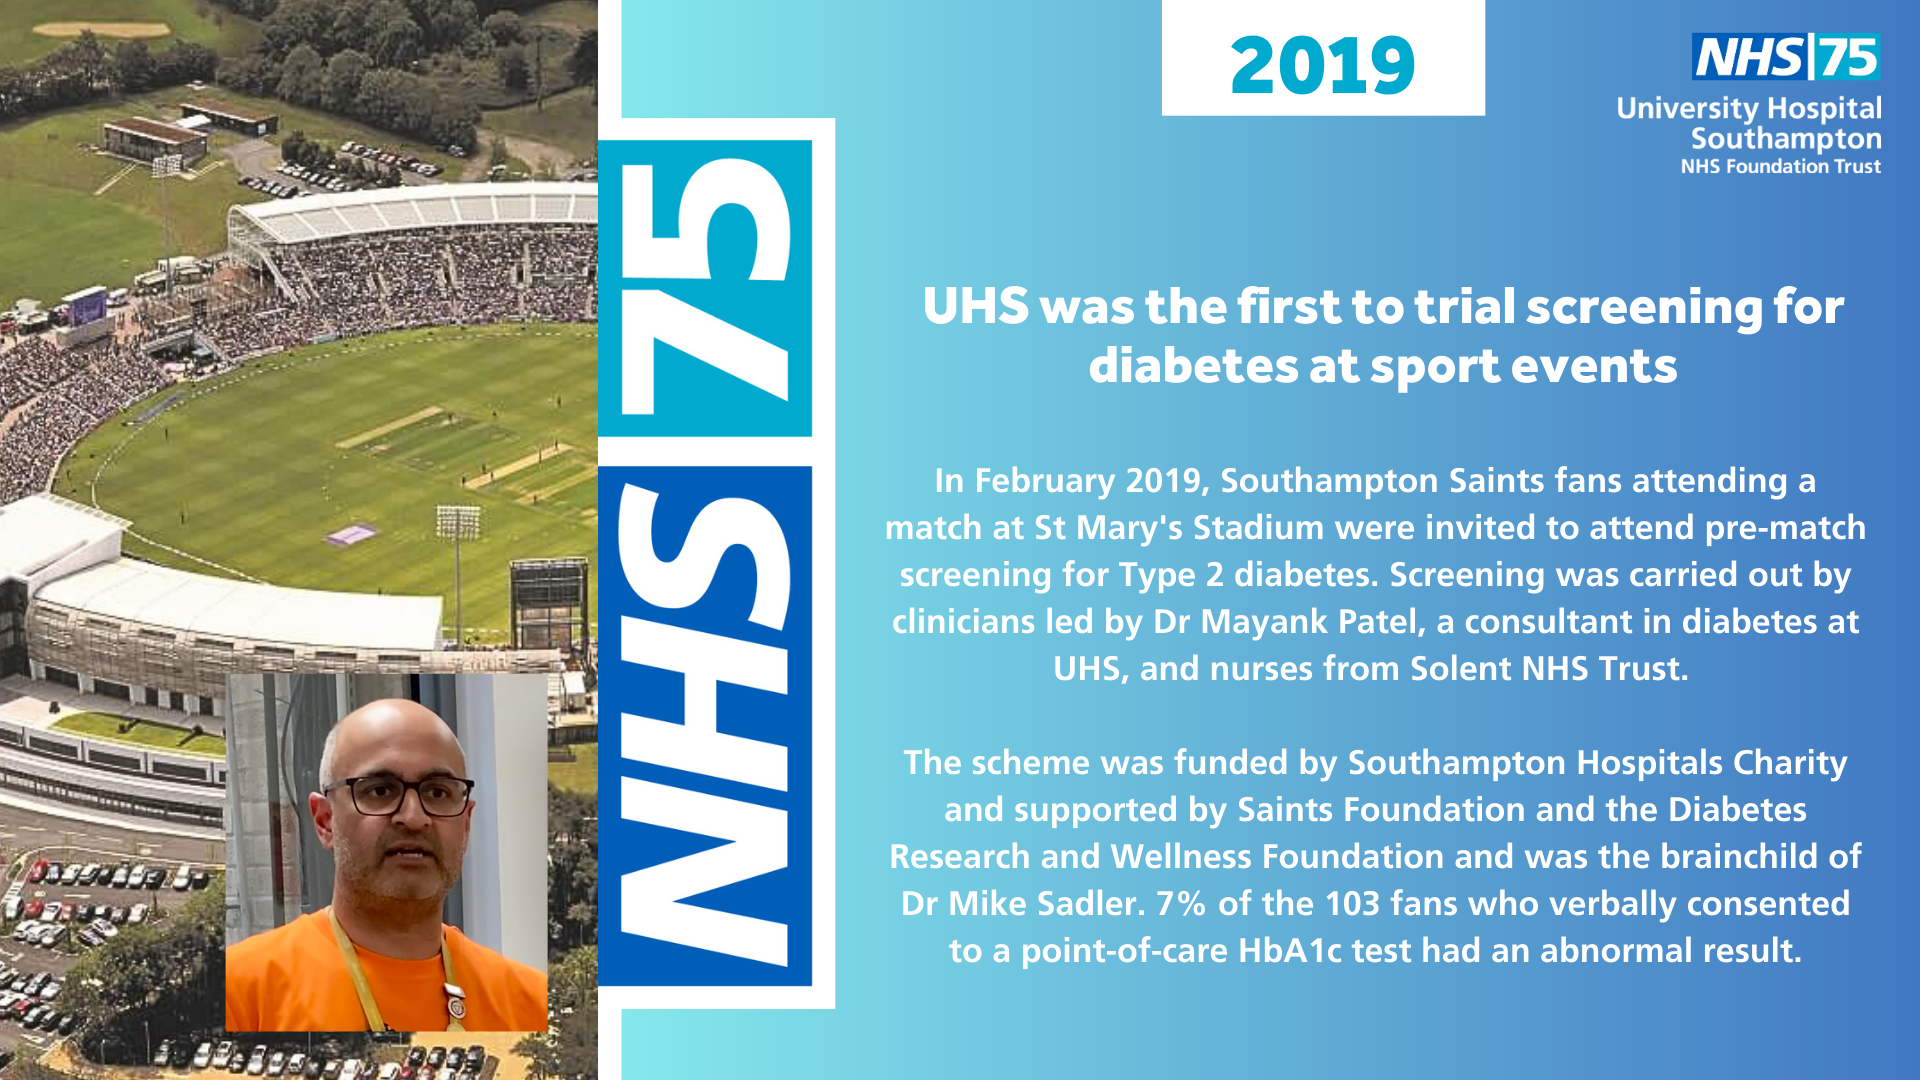 UHS was the first to trial screening for diabetes at sport events